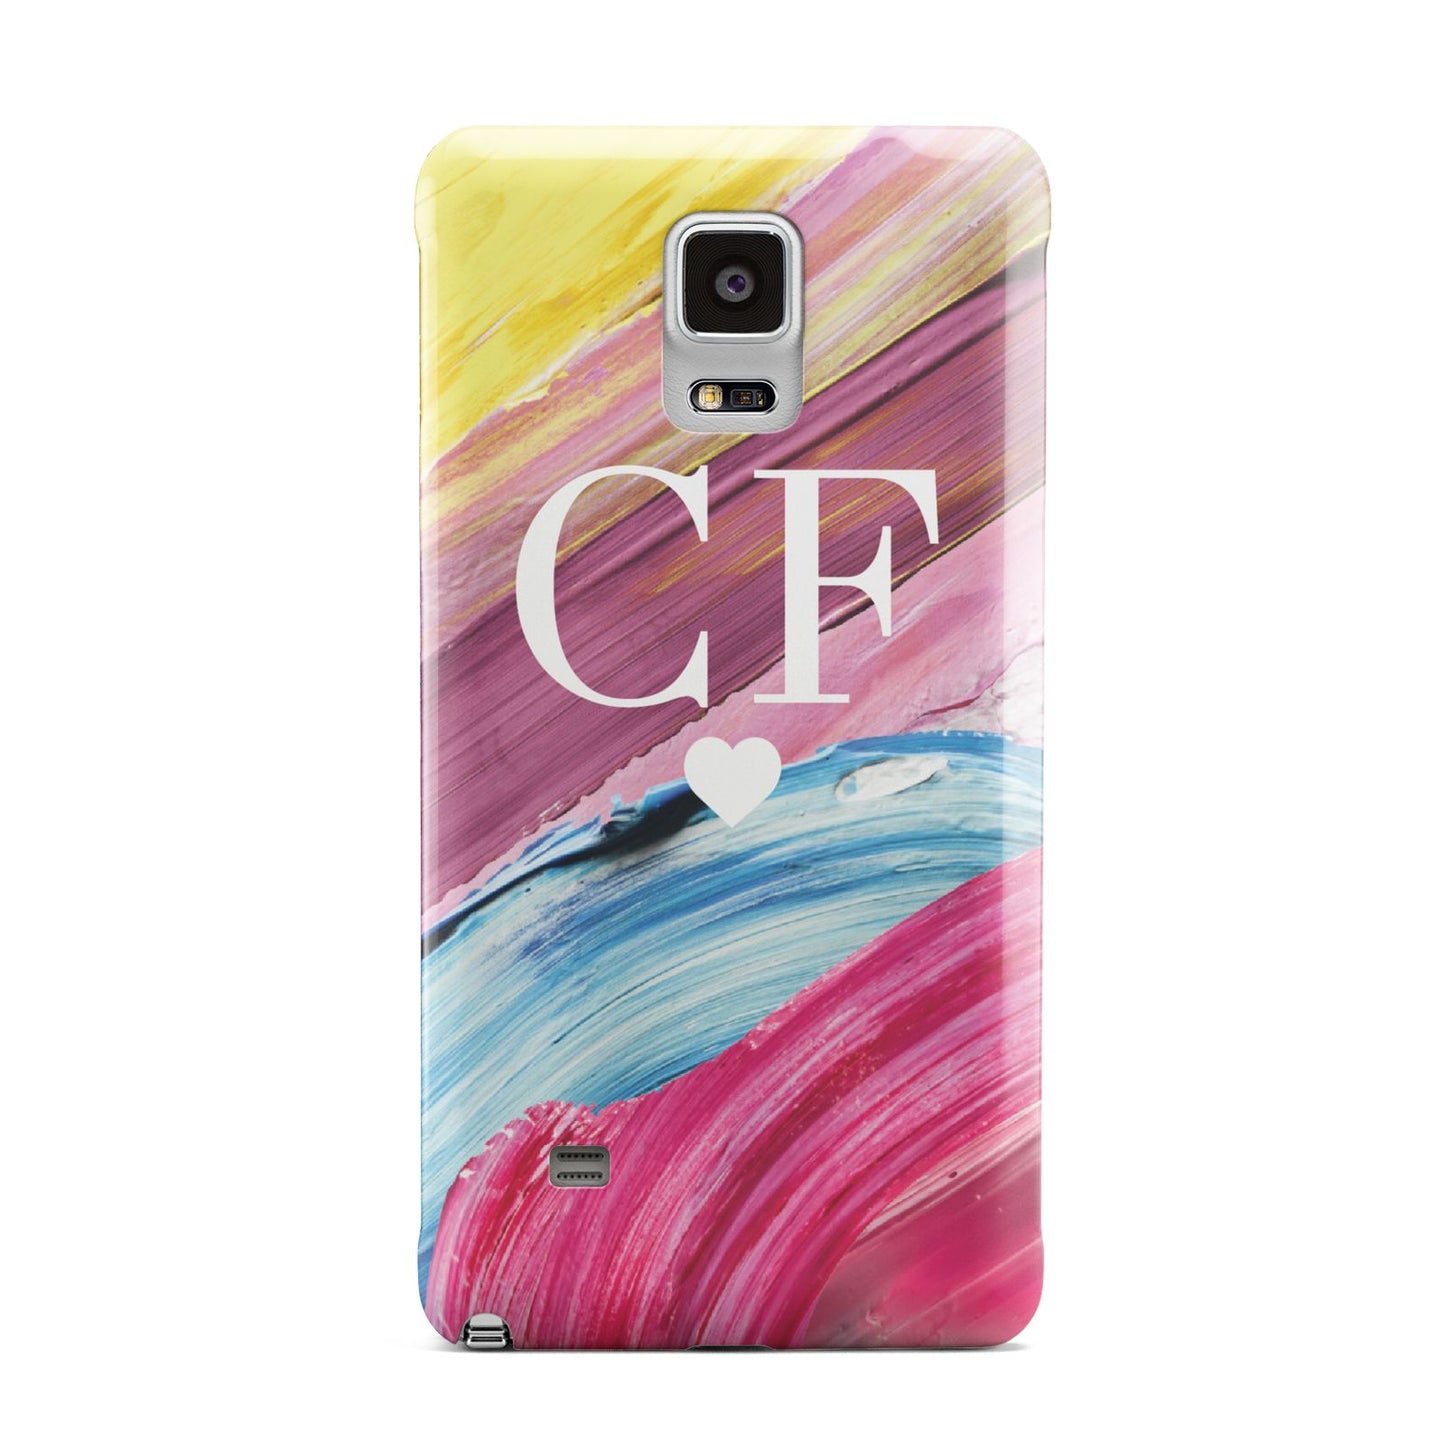 Personalised Paint Brush Initials Samsung Galaxy Note 4 Case